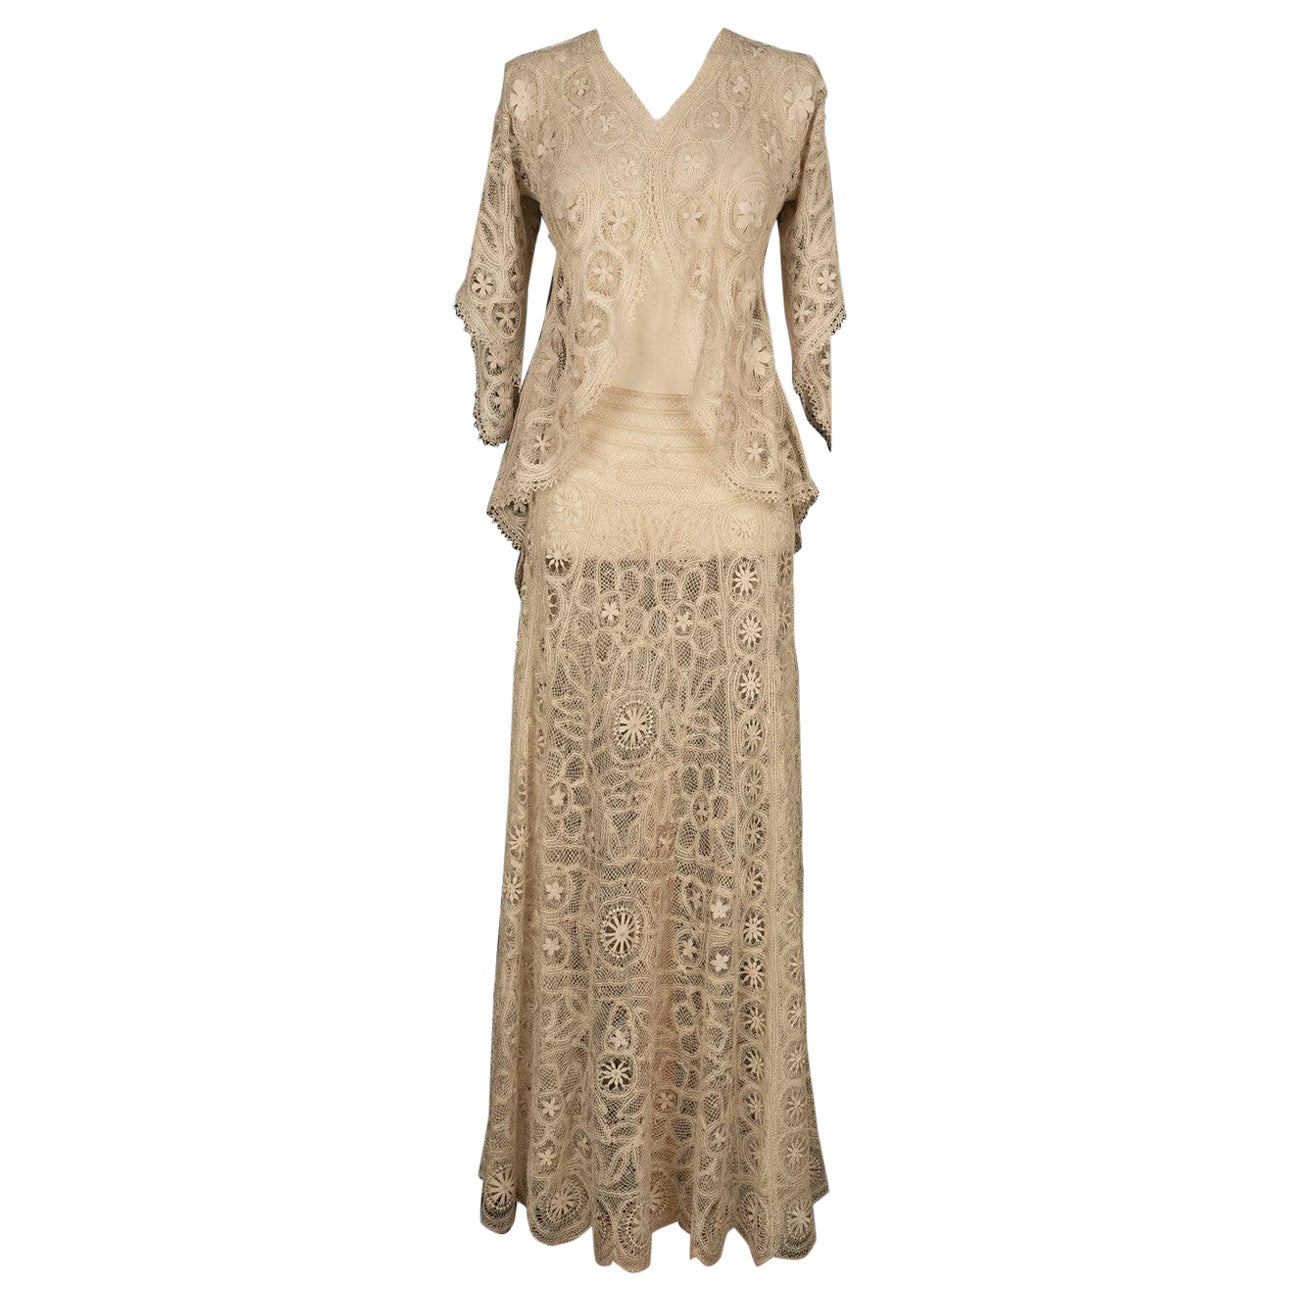 Lace Set of Short-Sleeved Jacket and Long Skirt, 1910